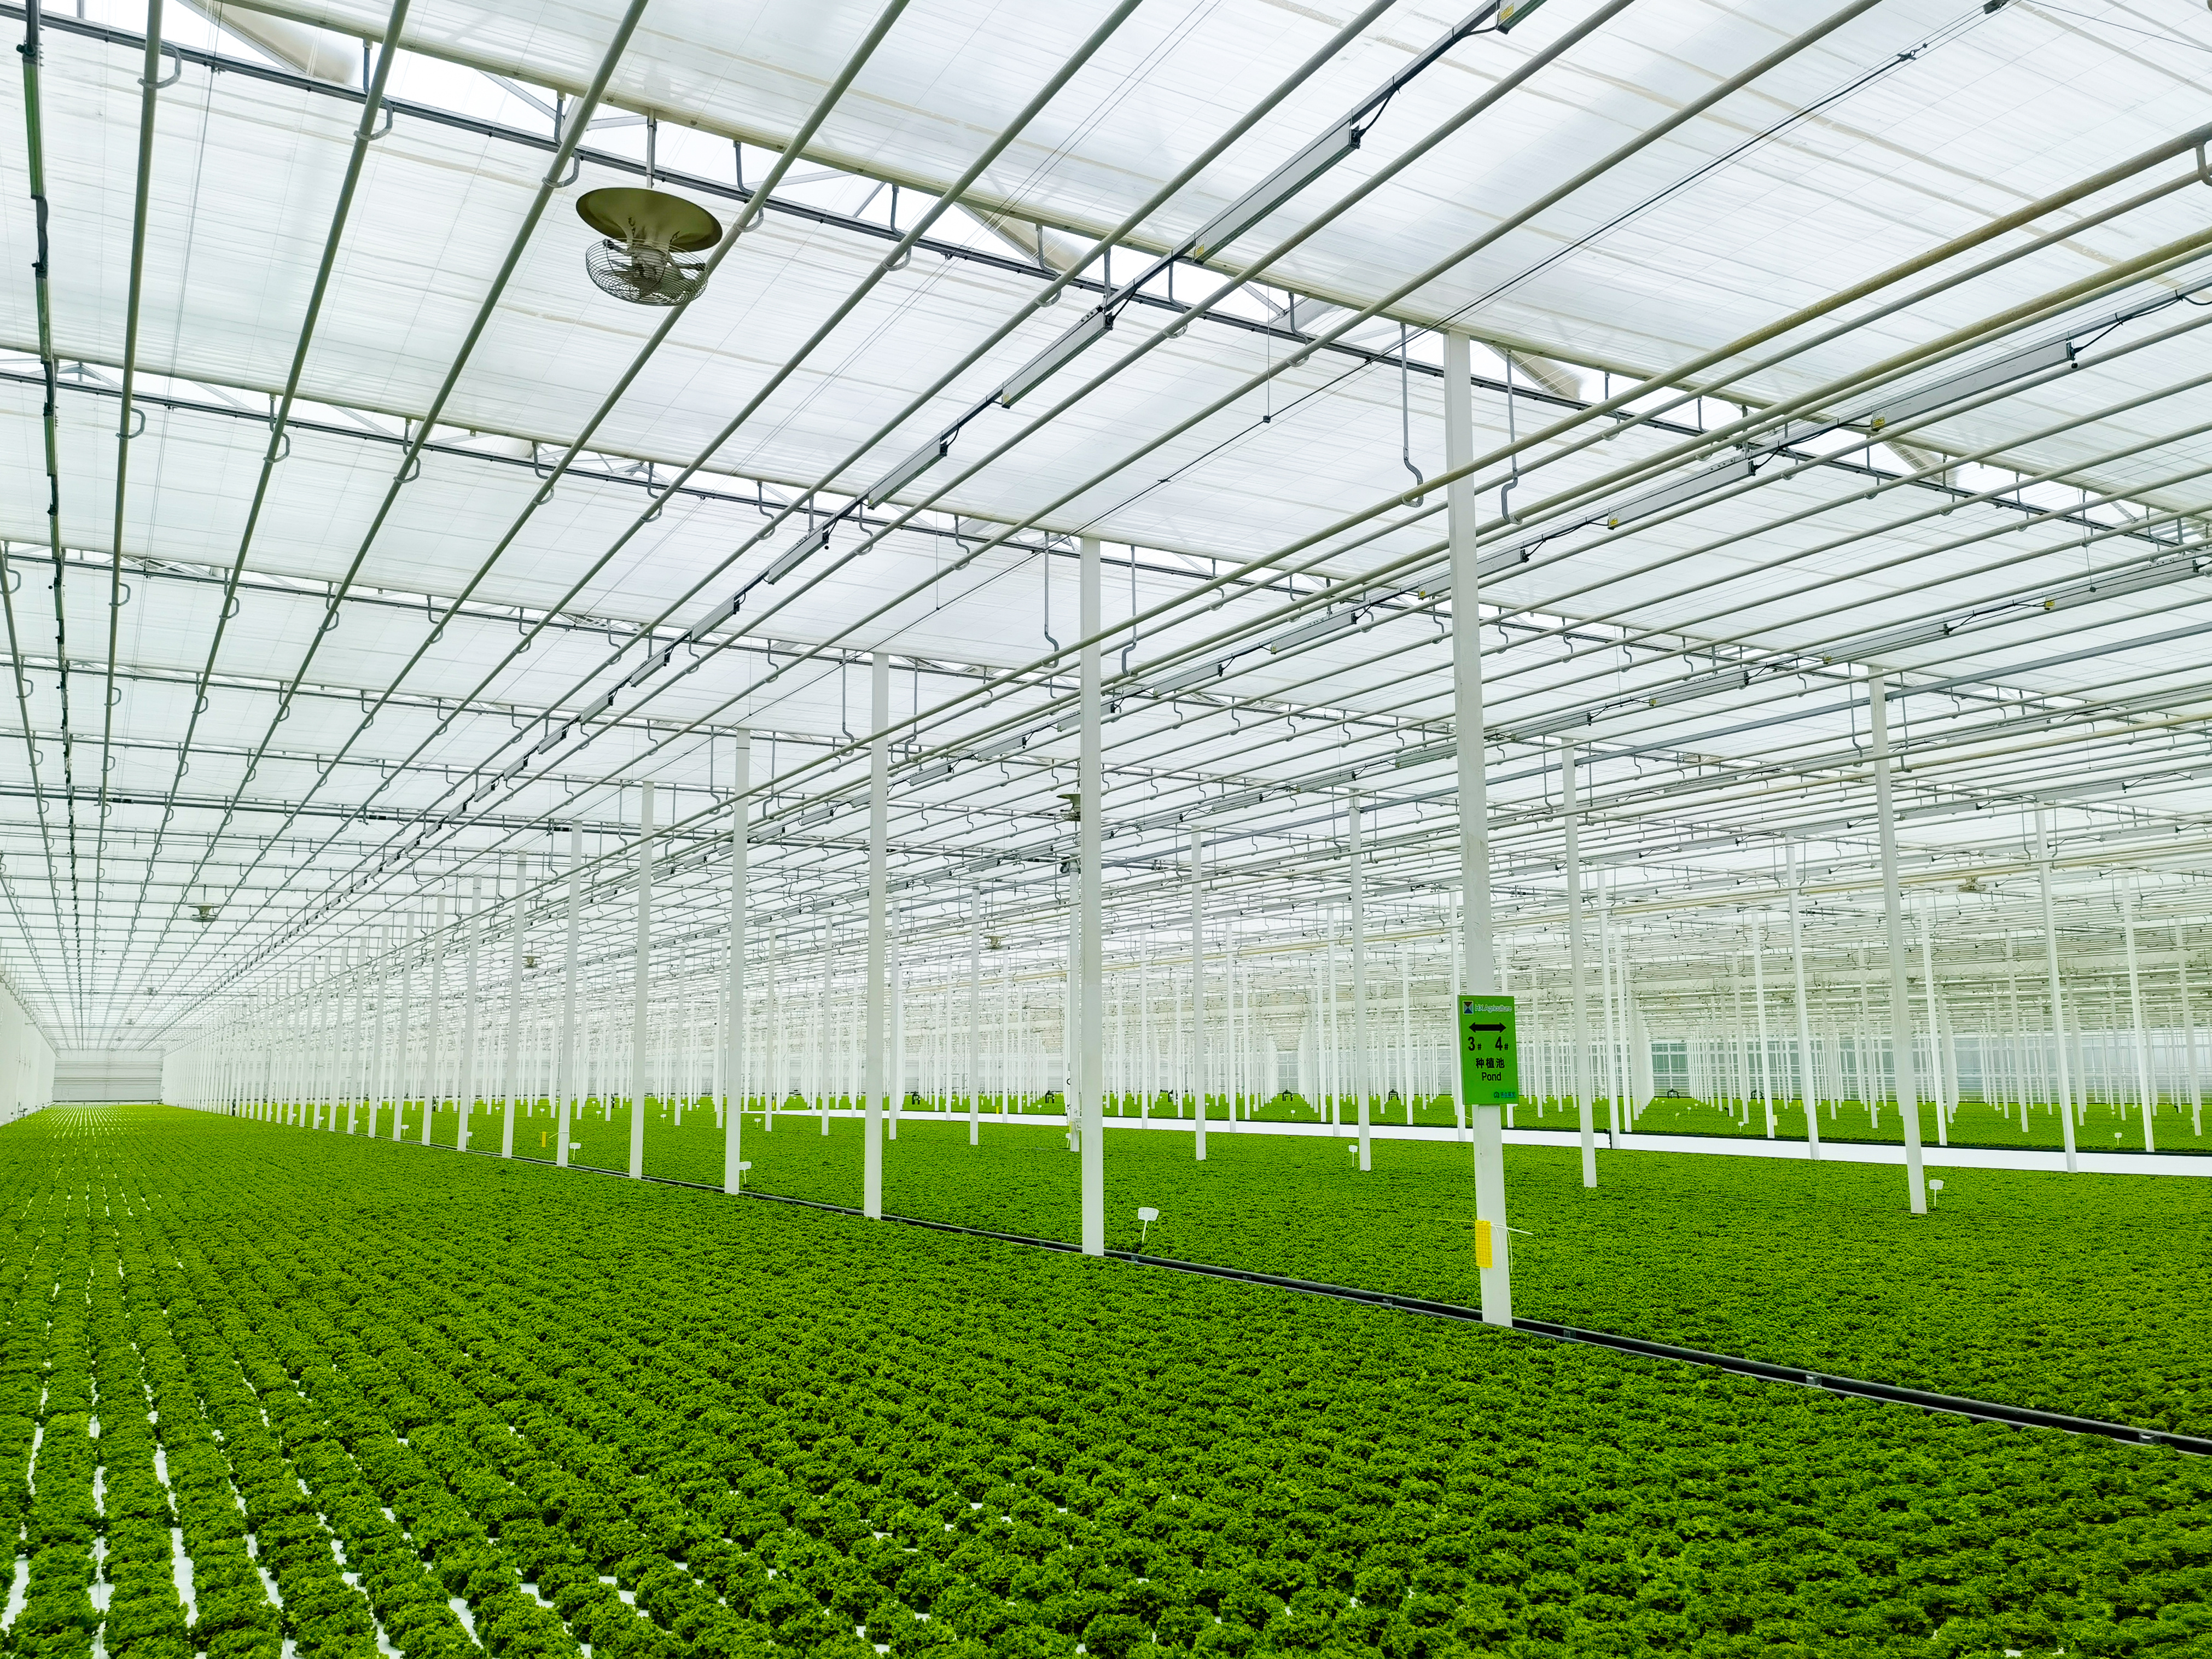 Jiashan Sino-Dutch Agricultural Digital Science and Innovation Demonstration Center greenhouse from inside with crops and V-Flofans